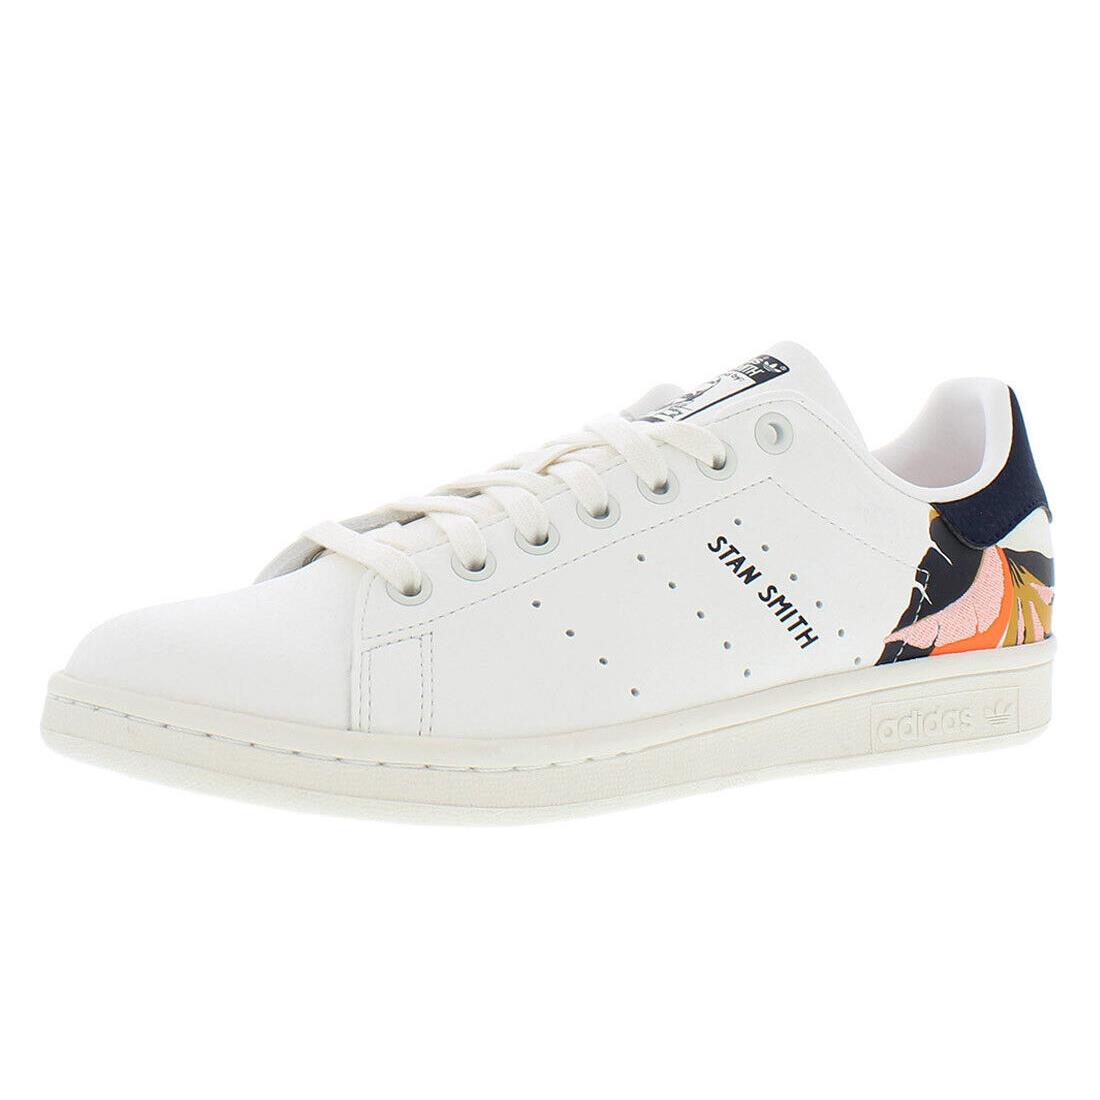 Adidas Stan Smith Womens Shoes Size 7 Color: Chalk White/legacy Ink/orange - Chalk White/Legacy Ink/Orange, Main: White